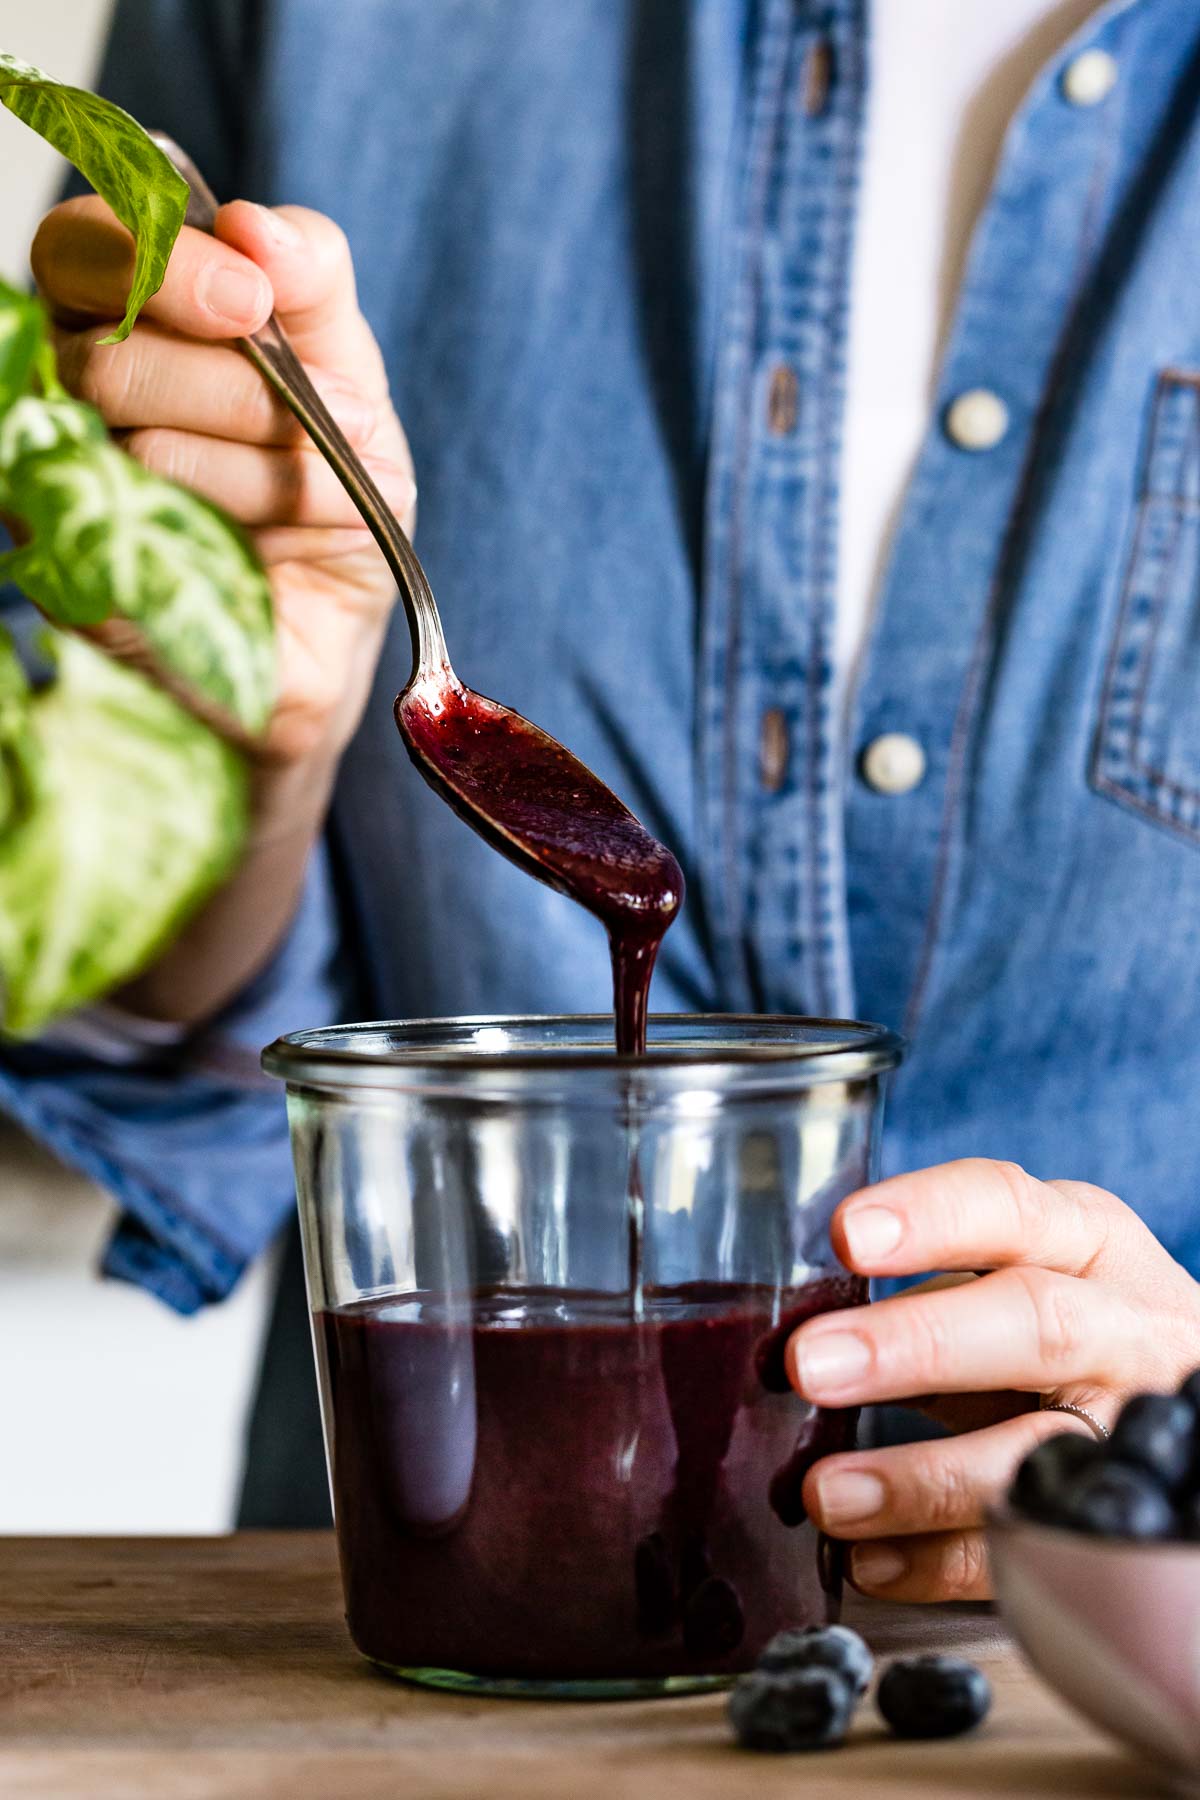 Blueberry puree is placed in a jar by a person